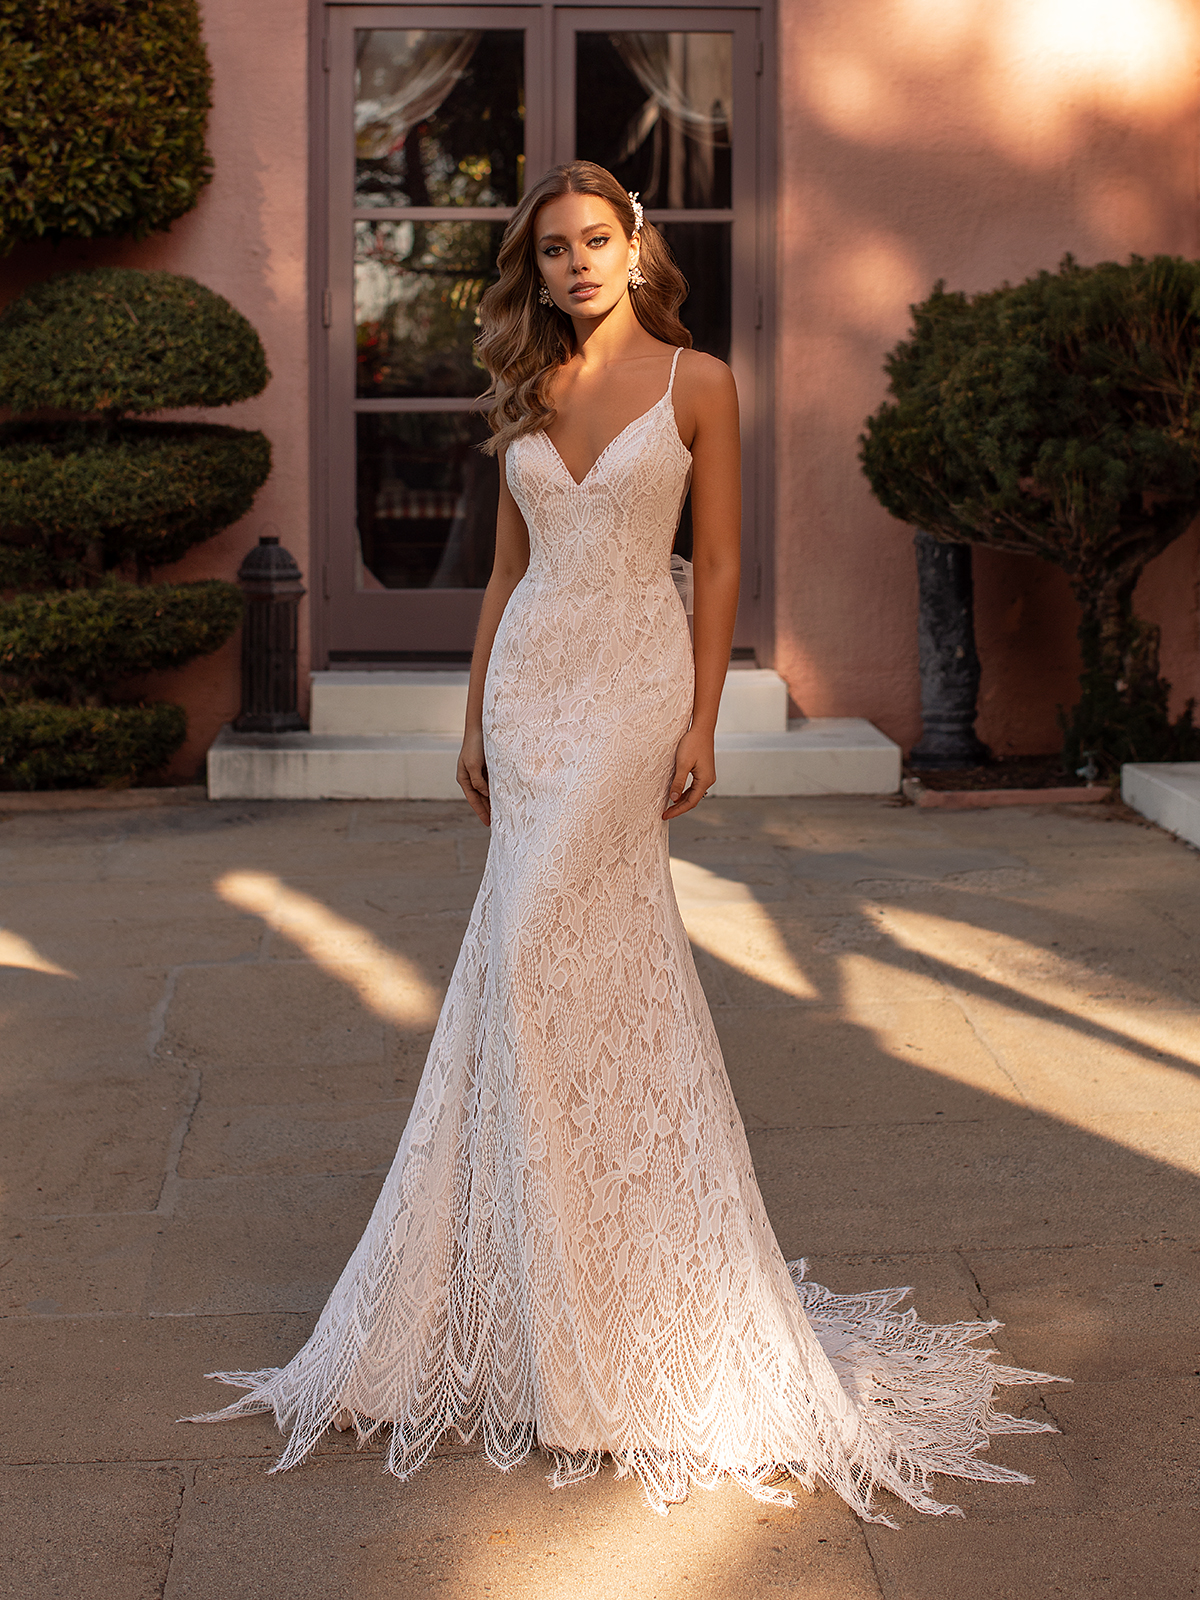 Strapless Beaded Lace Fit And Flare Wedding Dress With Sweetheart Neckline  | Kleinfeld Bridal